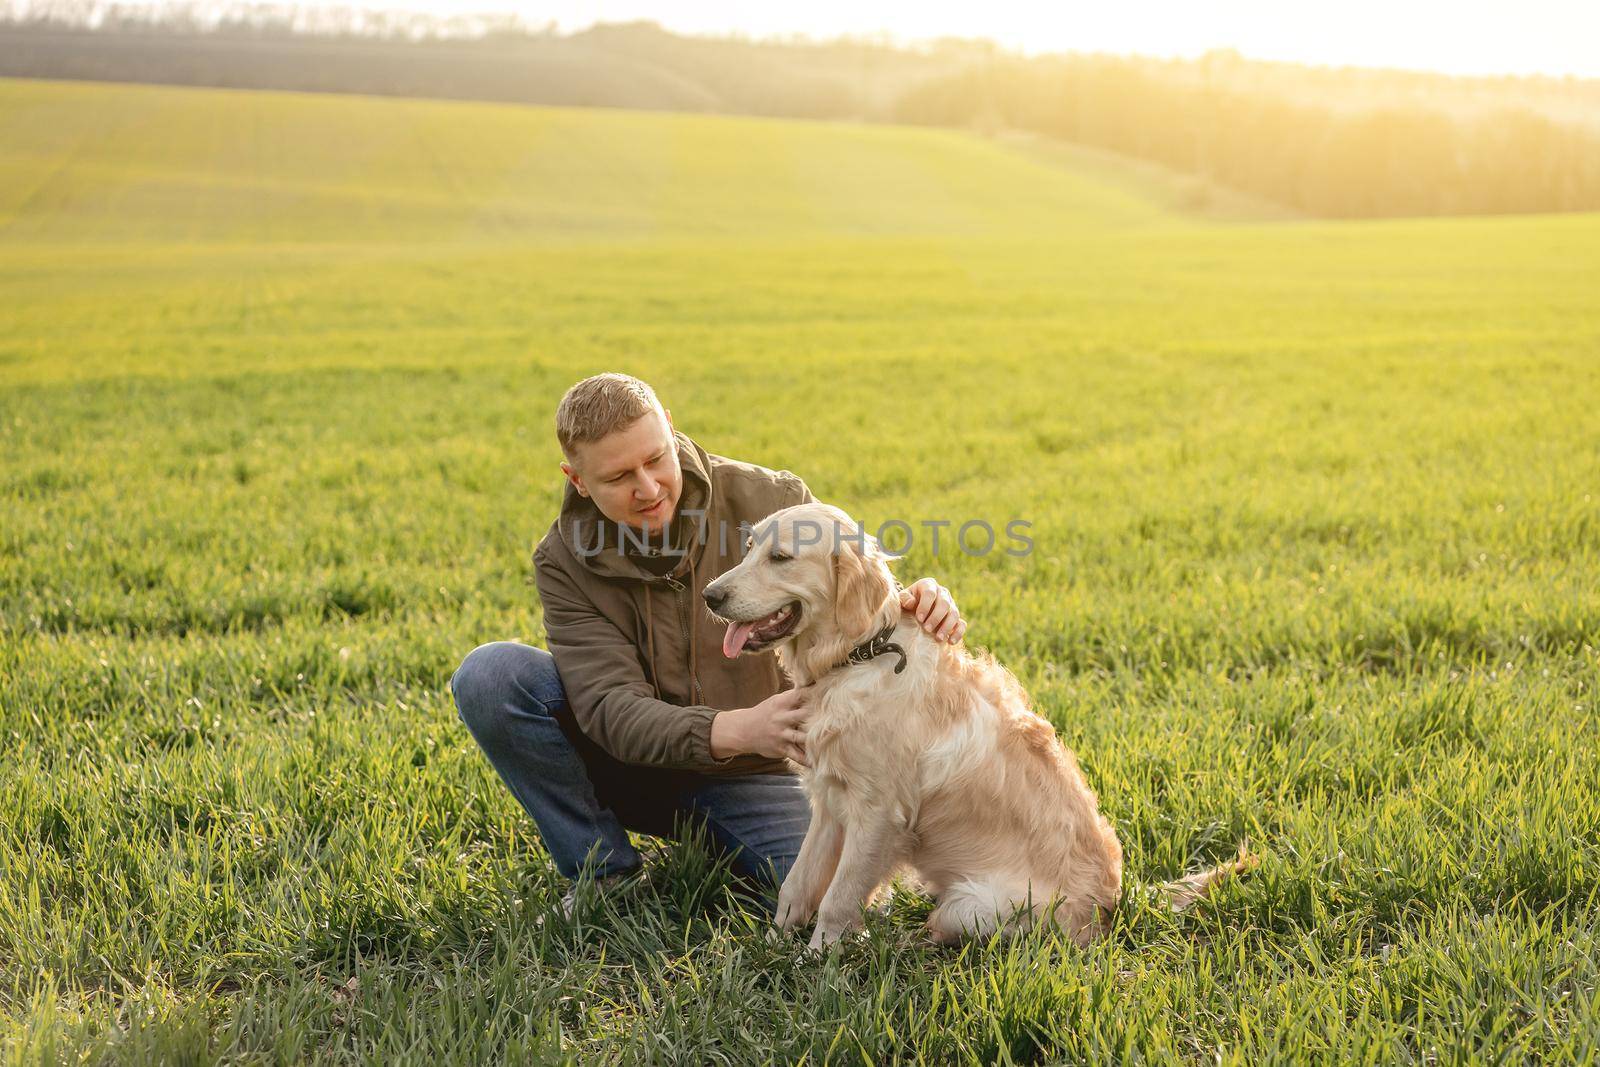 Handsome man cuddling cute dog outdoors on field